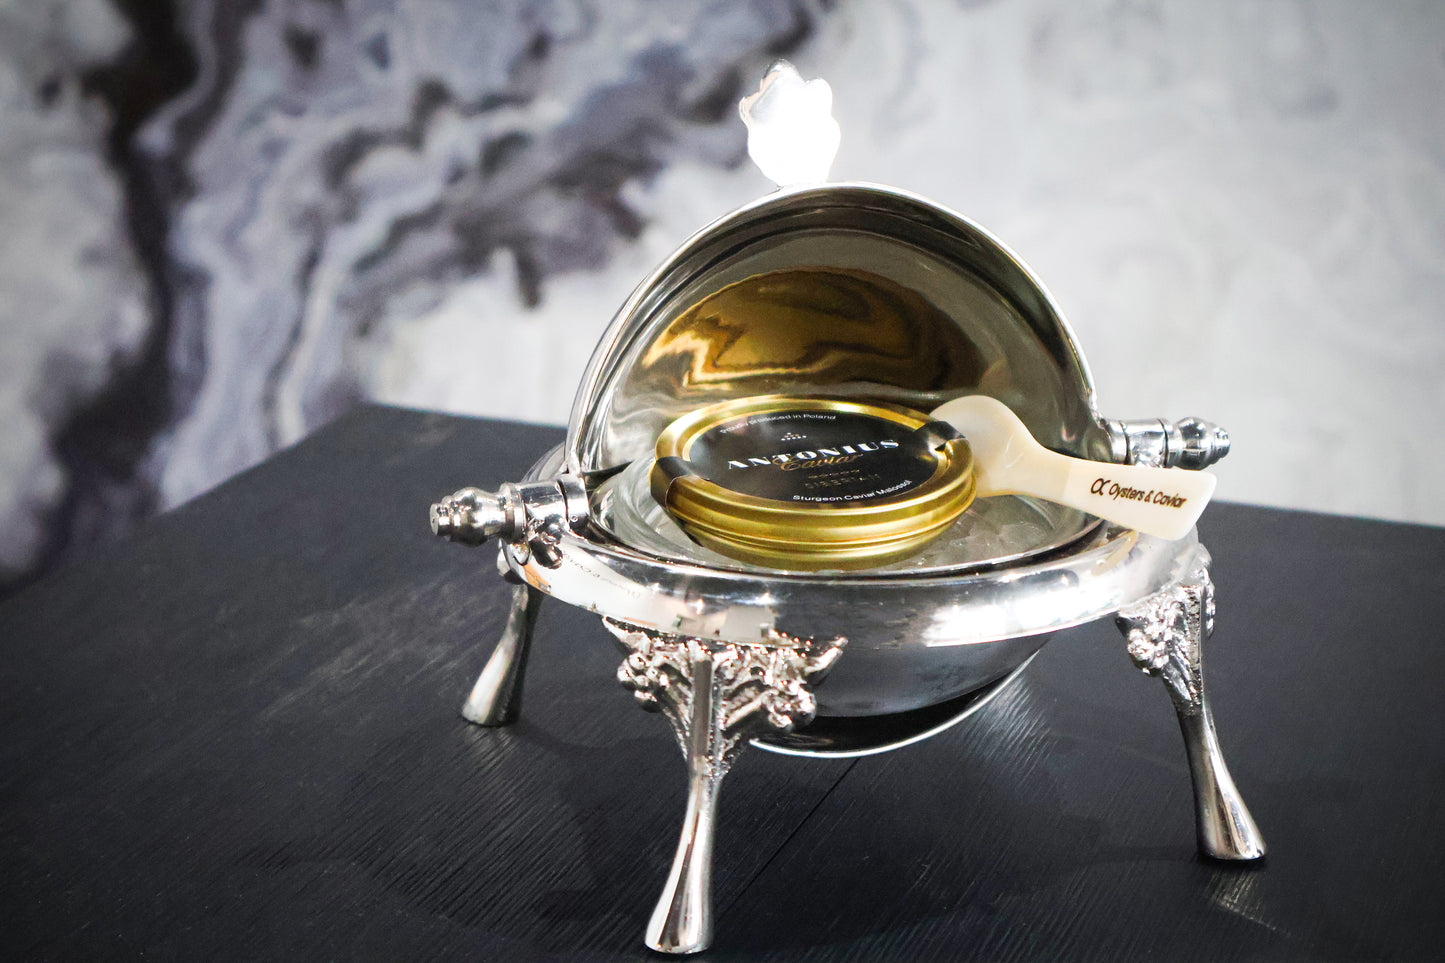 Stainless Steel Roll-top caviar server